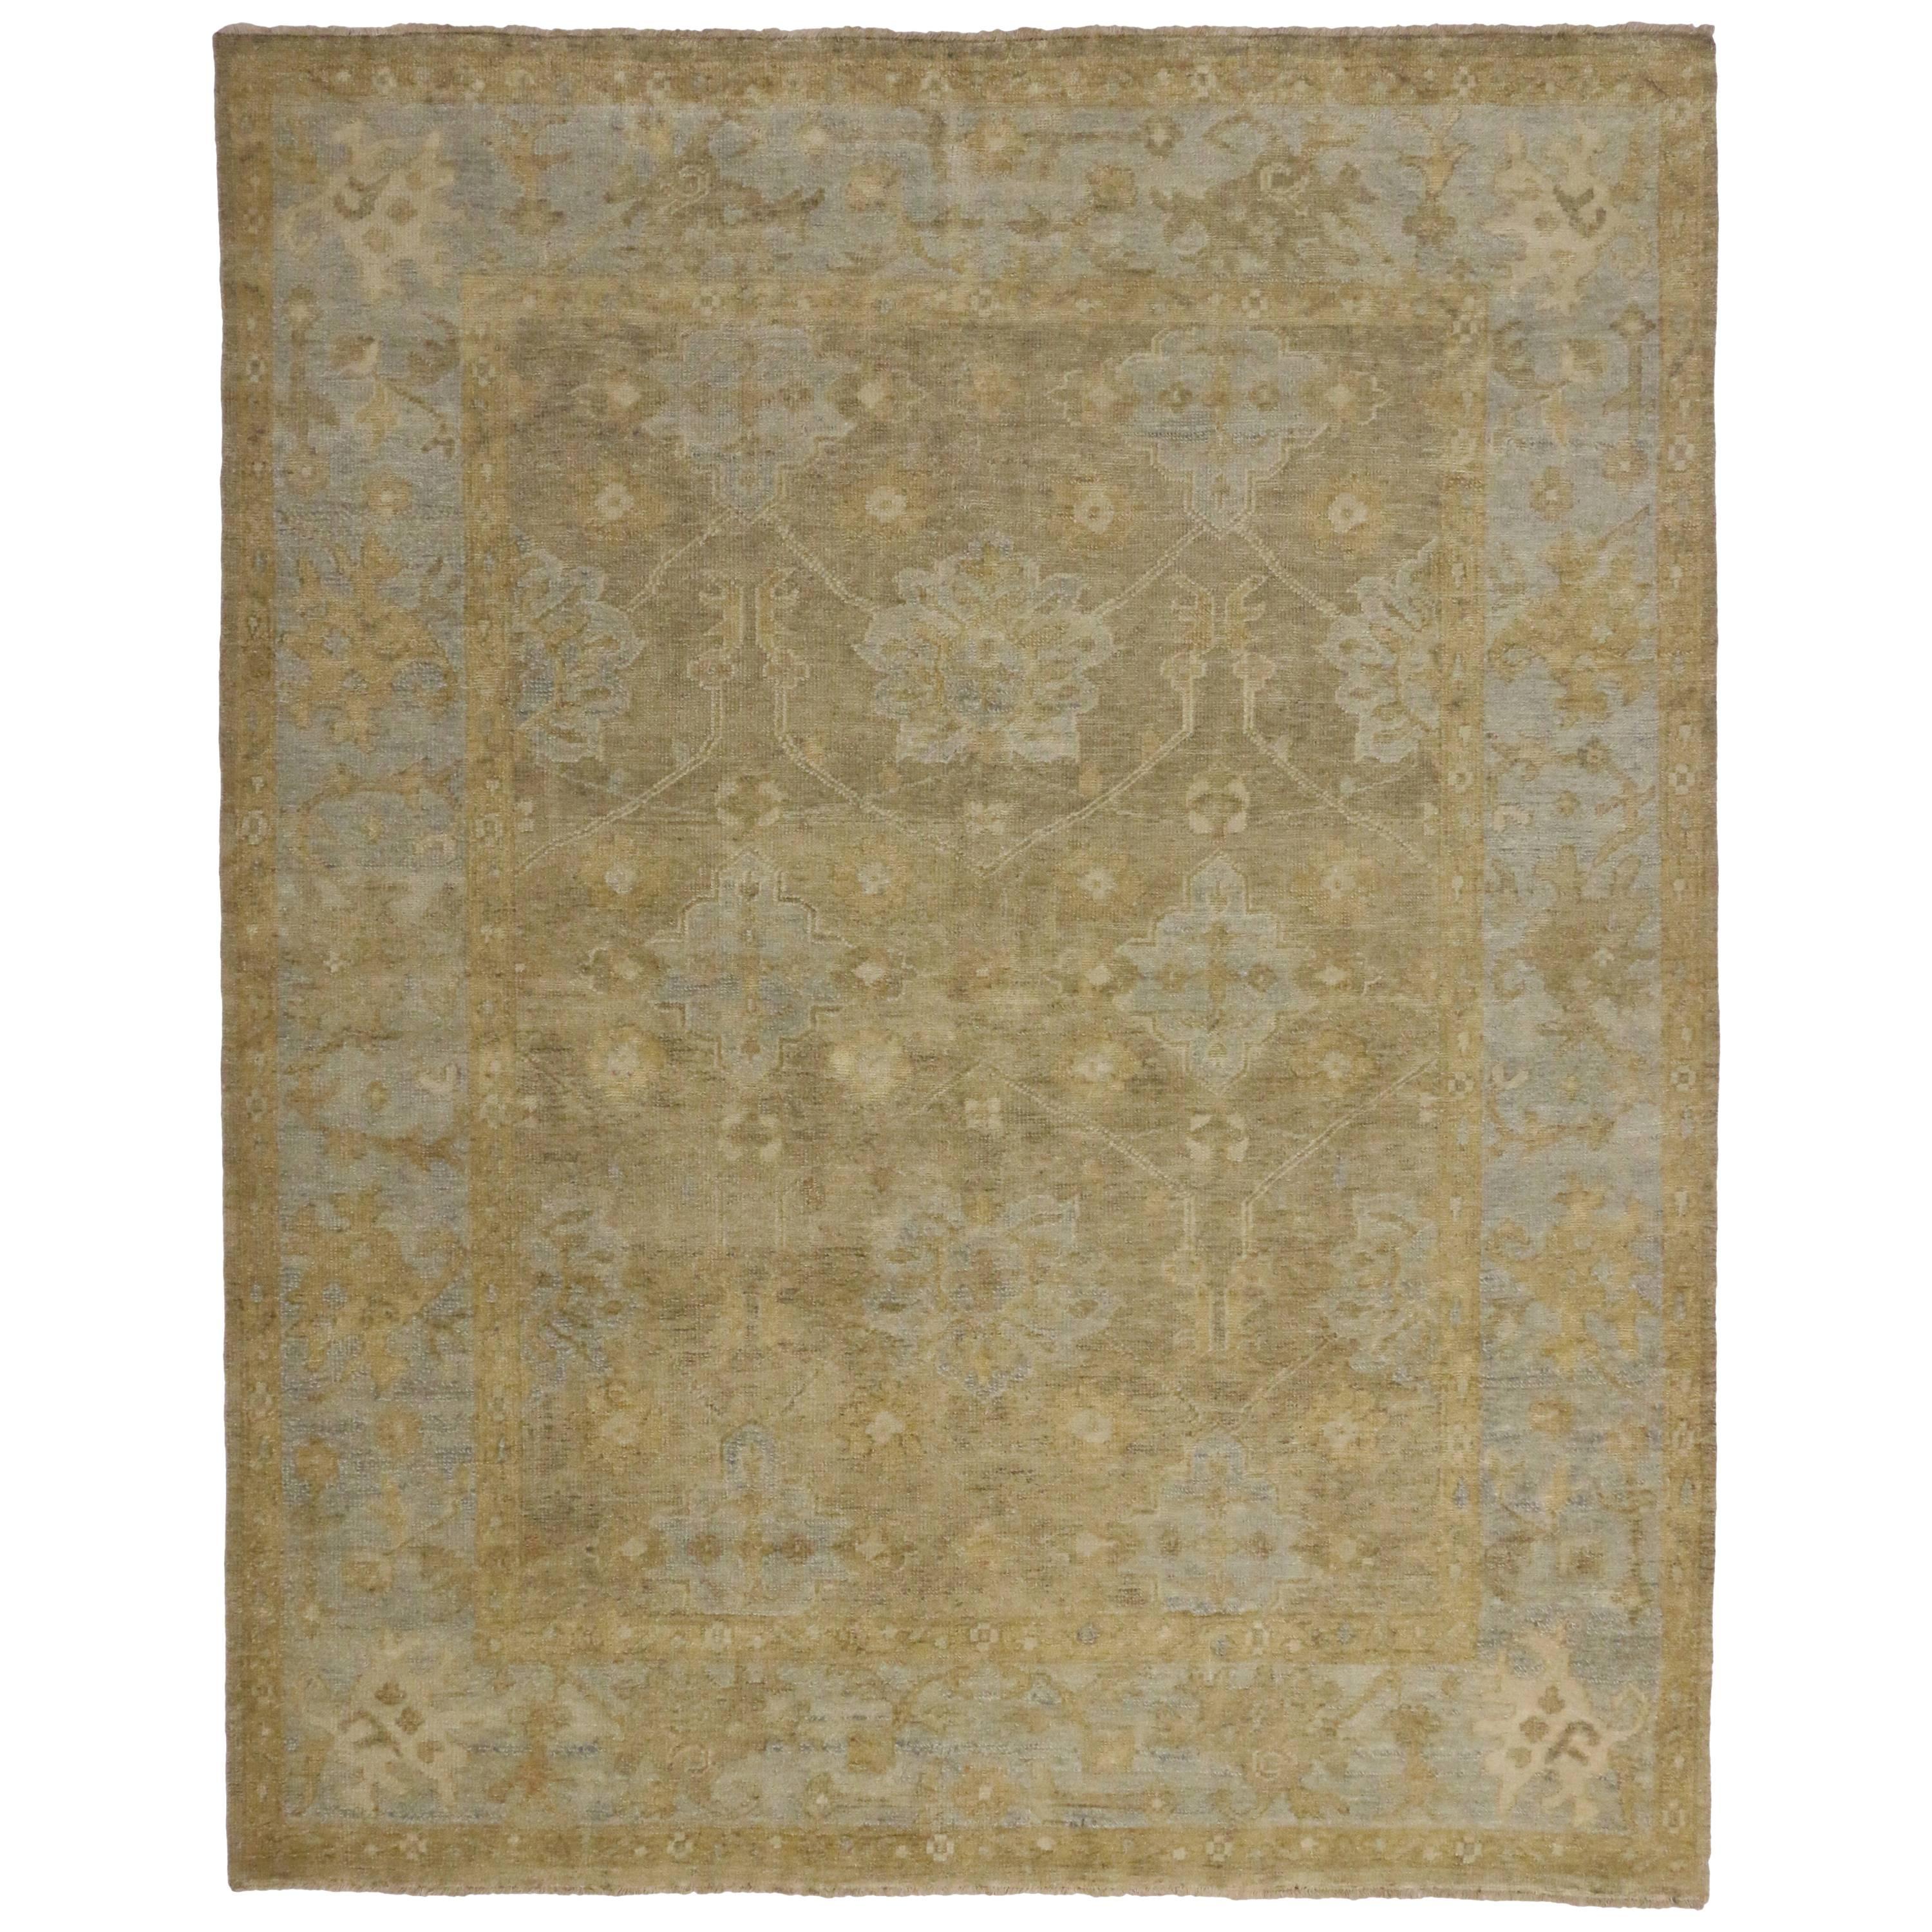 New Contemporary Oushak Rug with Swedish Gustavian Style, Transitional Area Rug